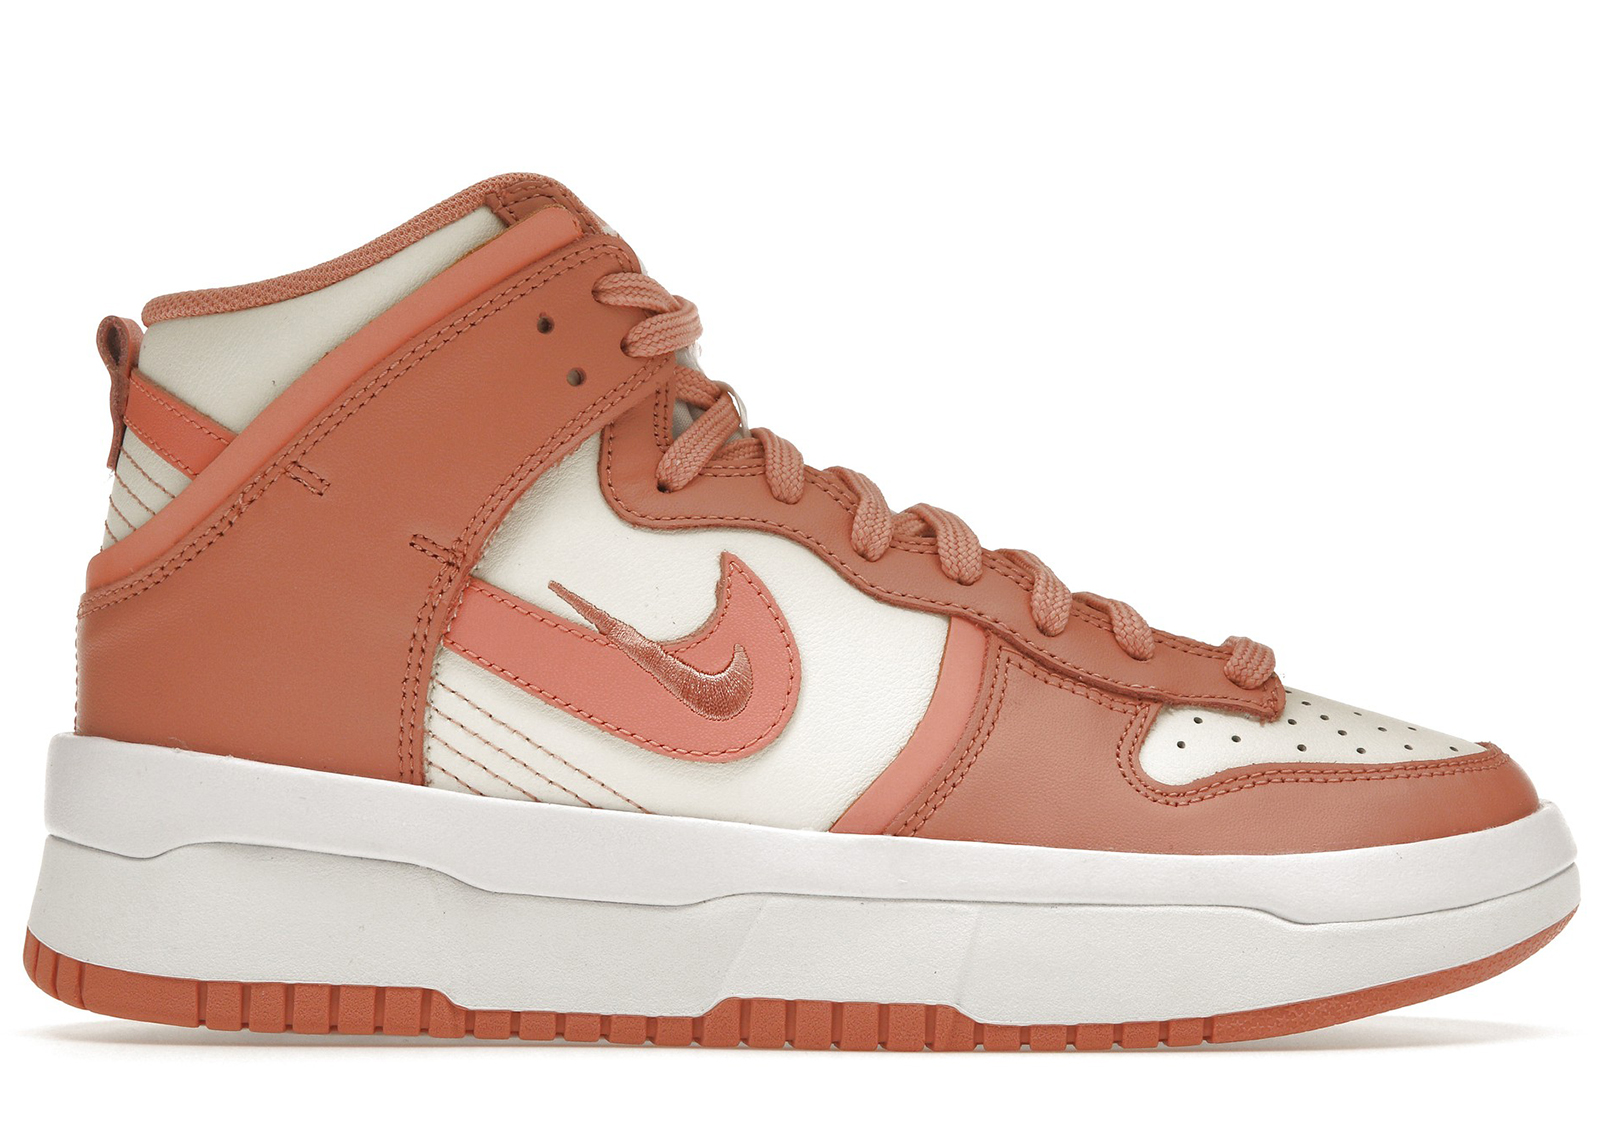 Nike Dunk High Up Pastels (Women's) - DH3718-700 - US